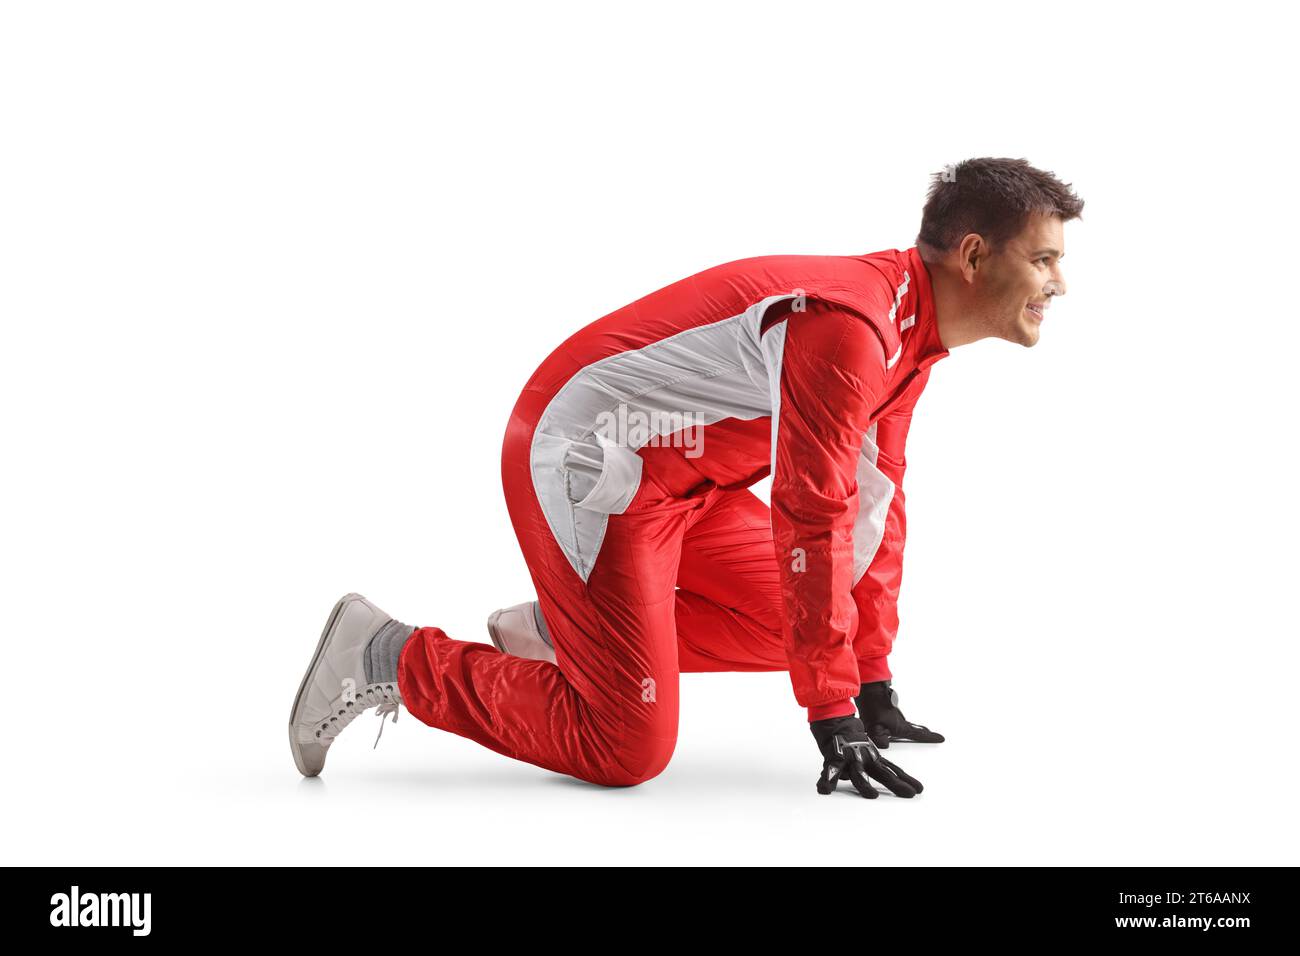 Full length profile shot of a car racer in a red suit starting a running race isolated on white background Stock Photo